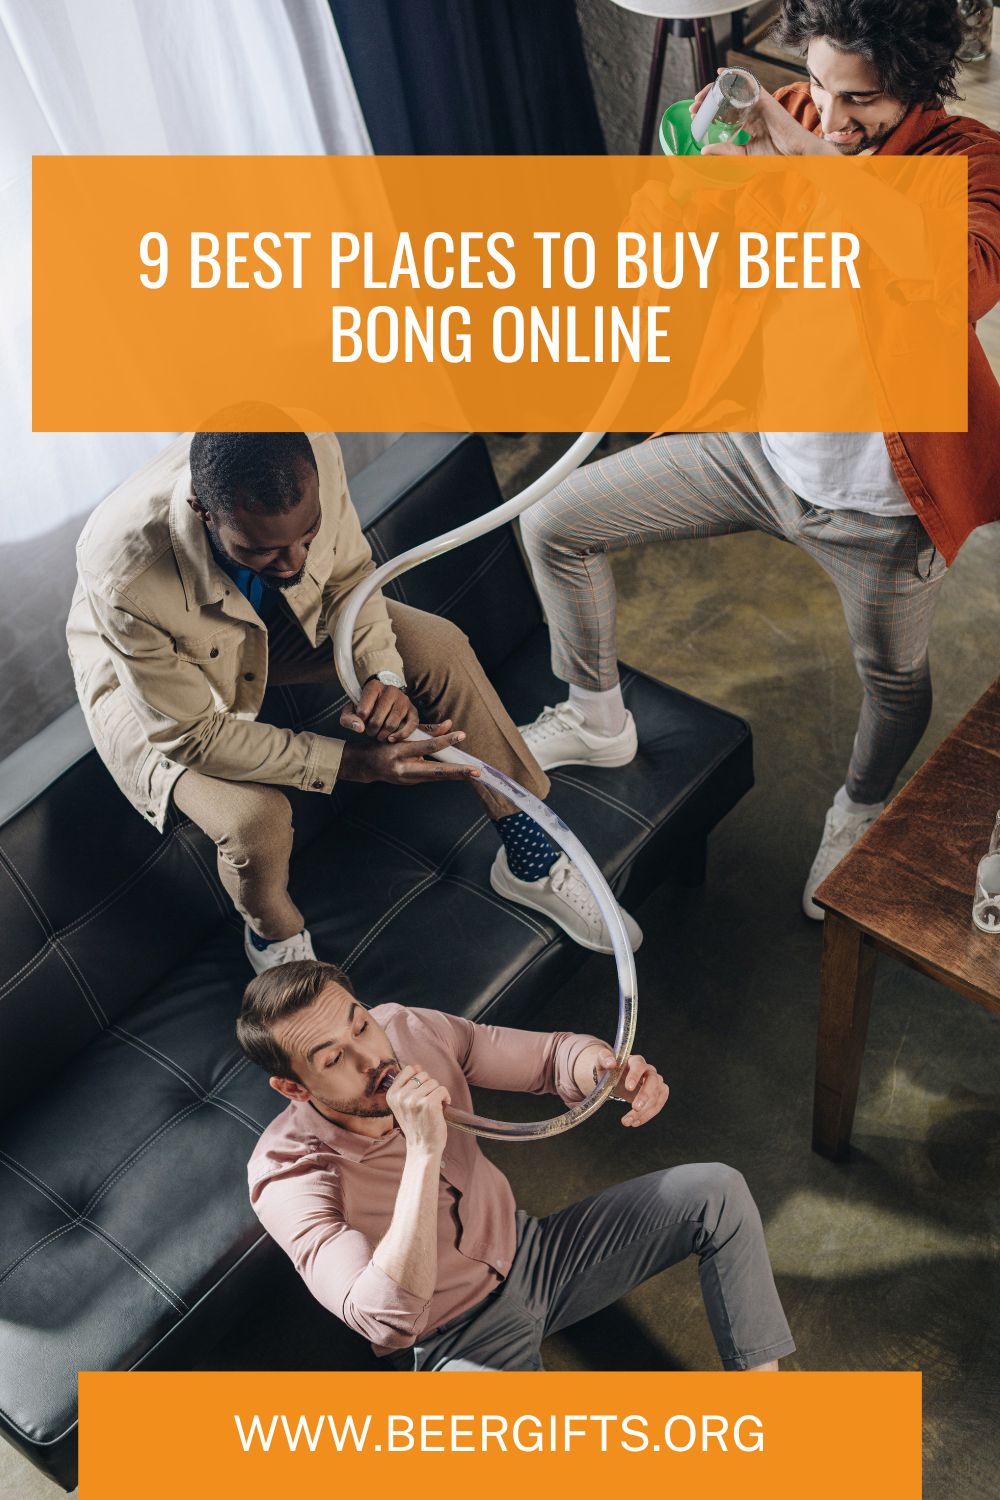 9 Best Places to Buy Beer Bong Online1